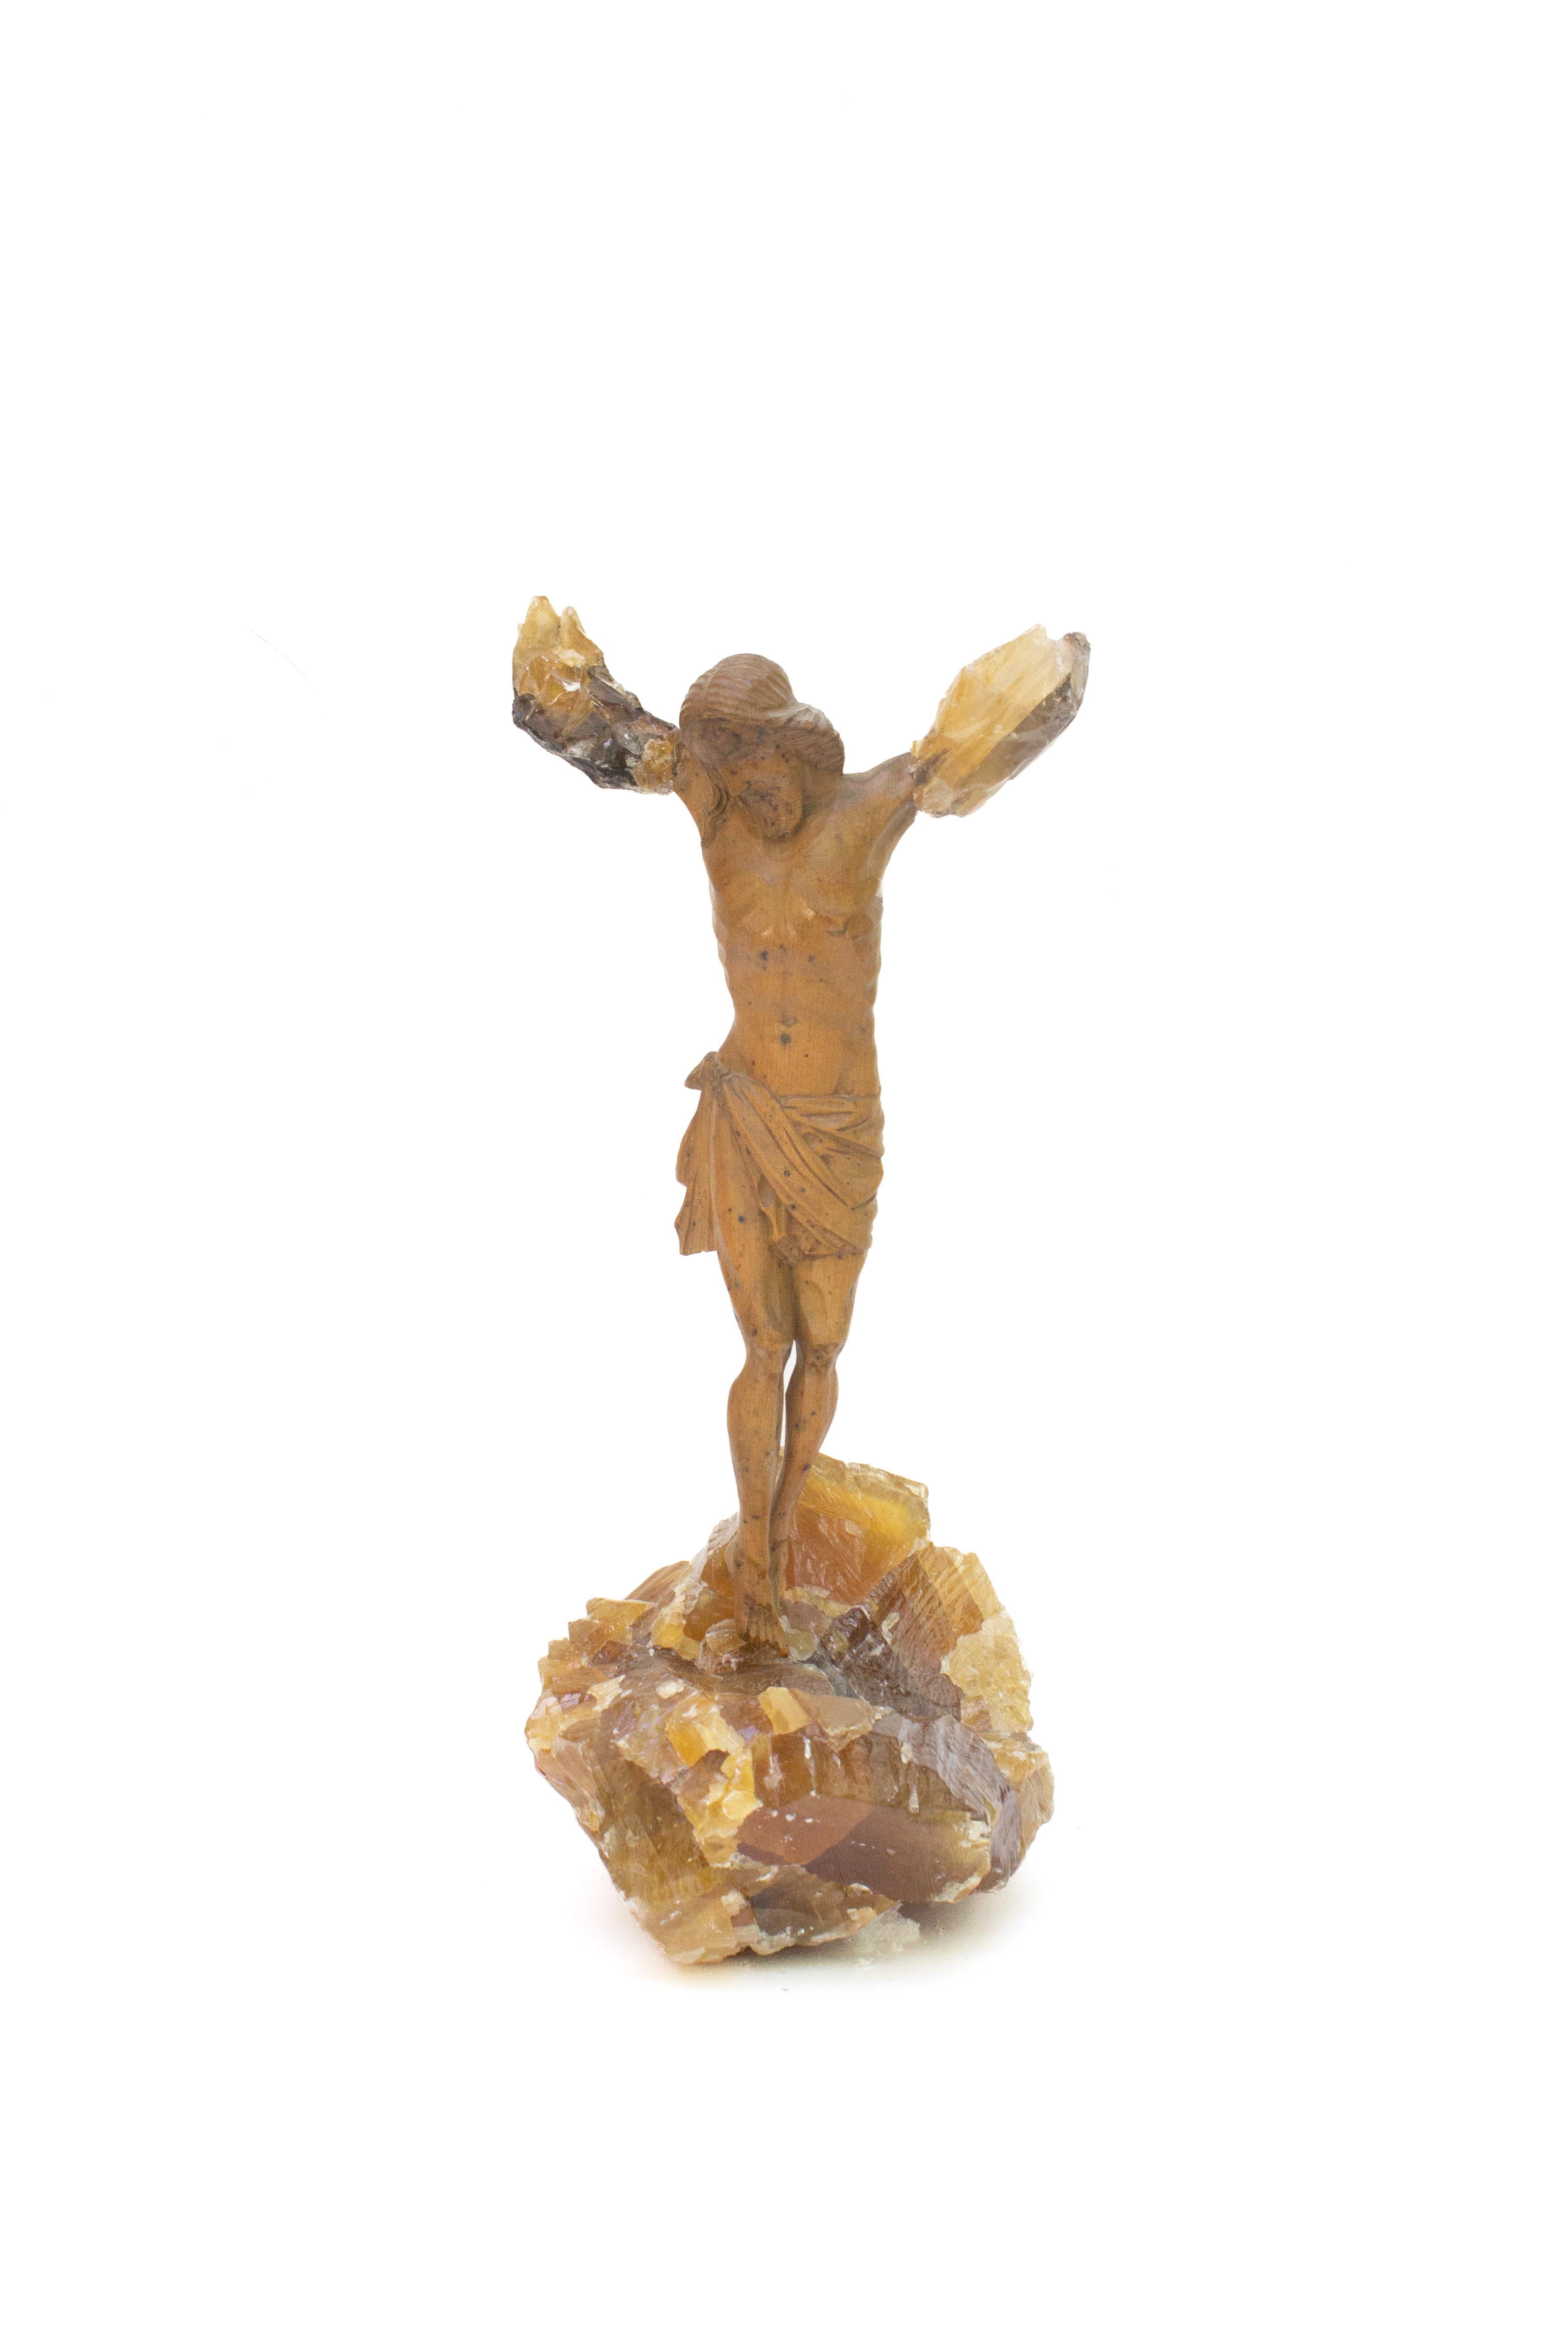 Sculptural 18th century Italian figure of Christ adorned and mounted with honey calcite crystals. The figure of Christ was originally part of a crucifix from a church in Tuscany. The broken arms of Christ are adorned with honey calcite crystals in